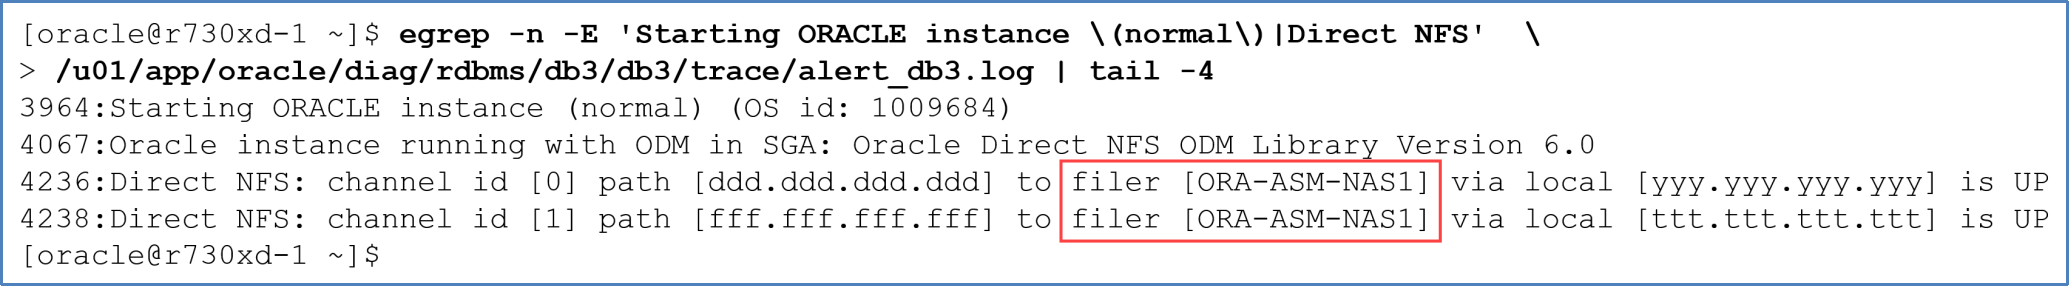 Should the "server" parameter be defined in file oranfstab, this diagram shows that the value of the "server" parameter will be used as the filer name in the Orale instance alert.log.